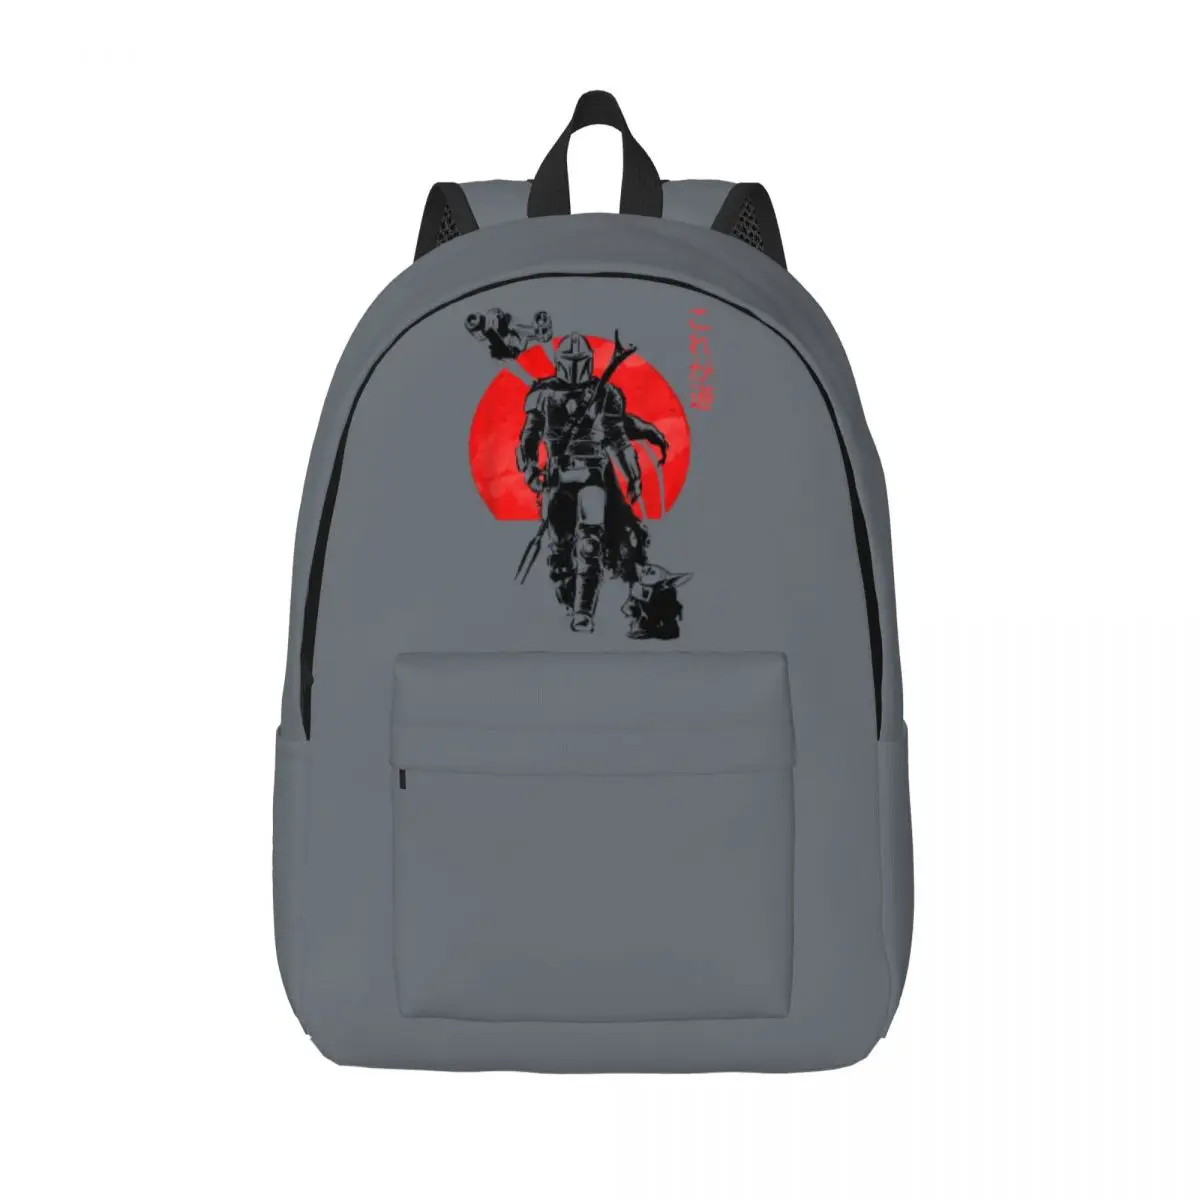 

Disney Star Wars Backpack Middle High College School Student The Mandalorian The Child Red Sun Bookbag Teens Daypack Outdoor